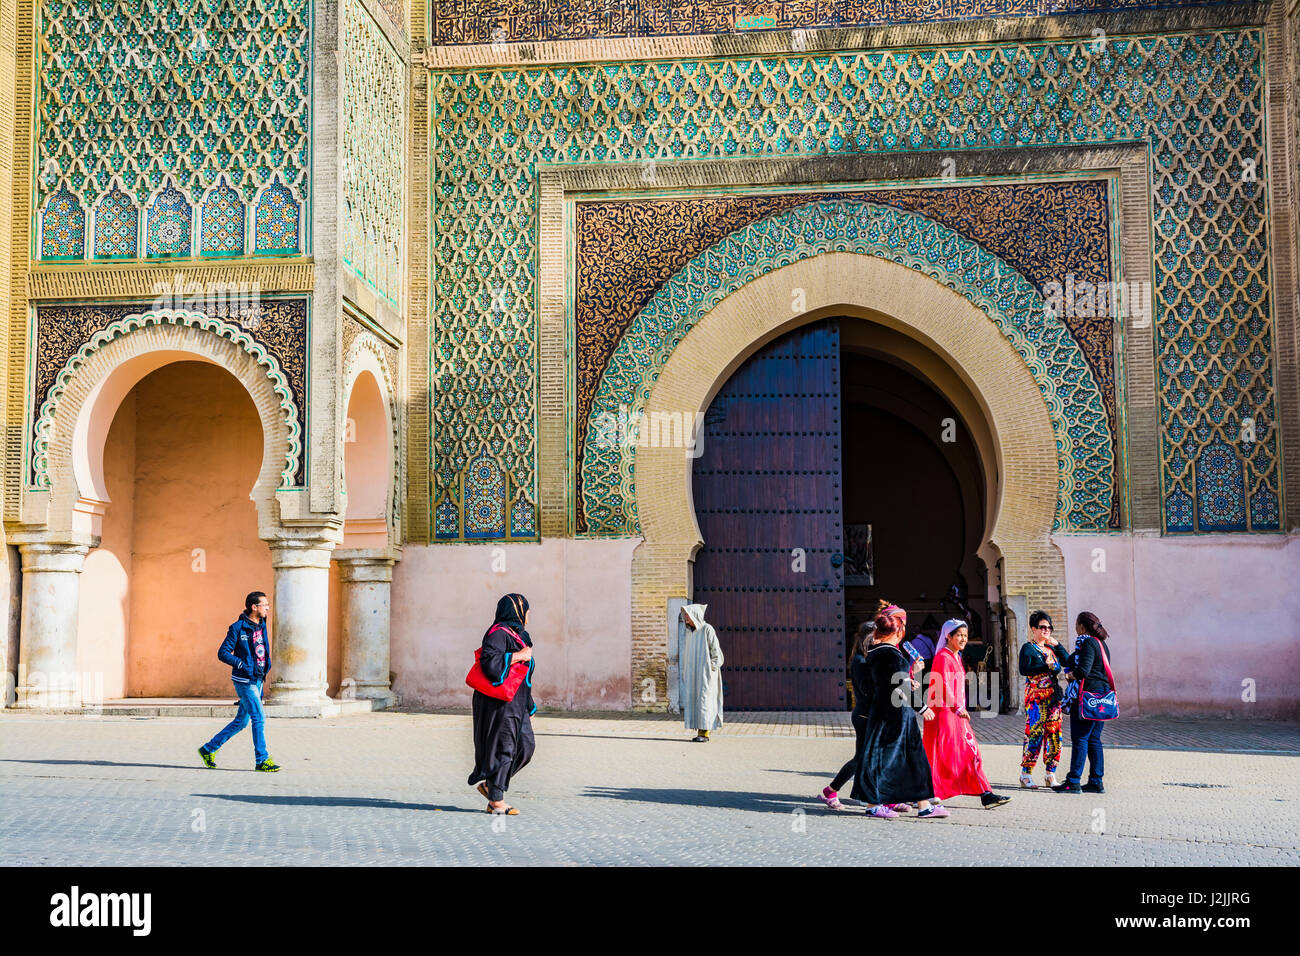 Bab Mansour Gate, a tourist attraction and landmark of the city, Meknes, Morocco, North Africa Stock Photo